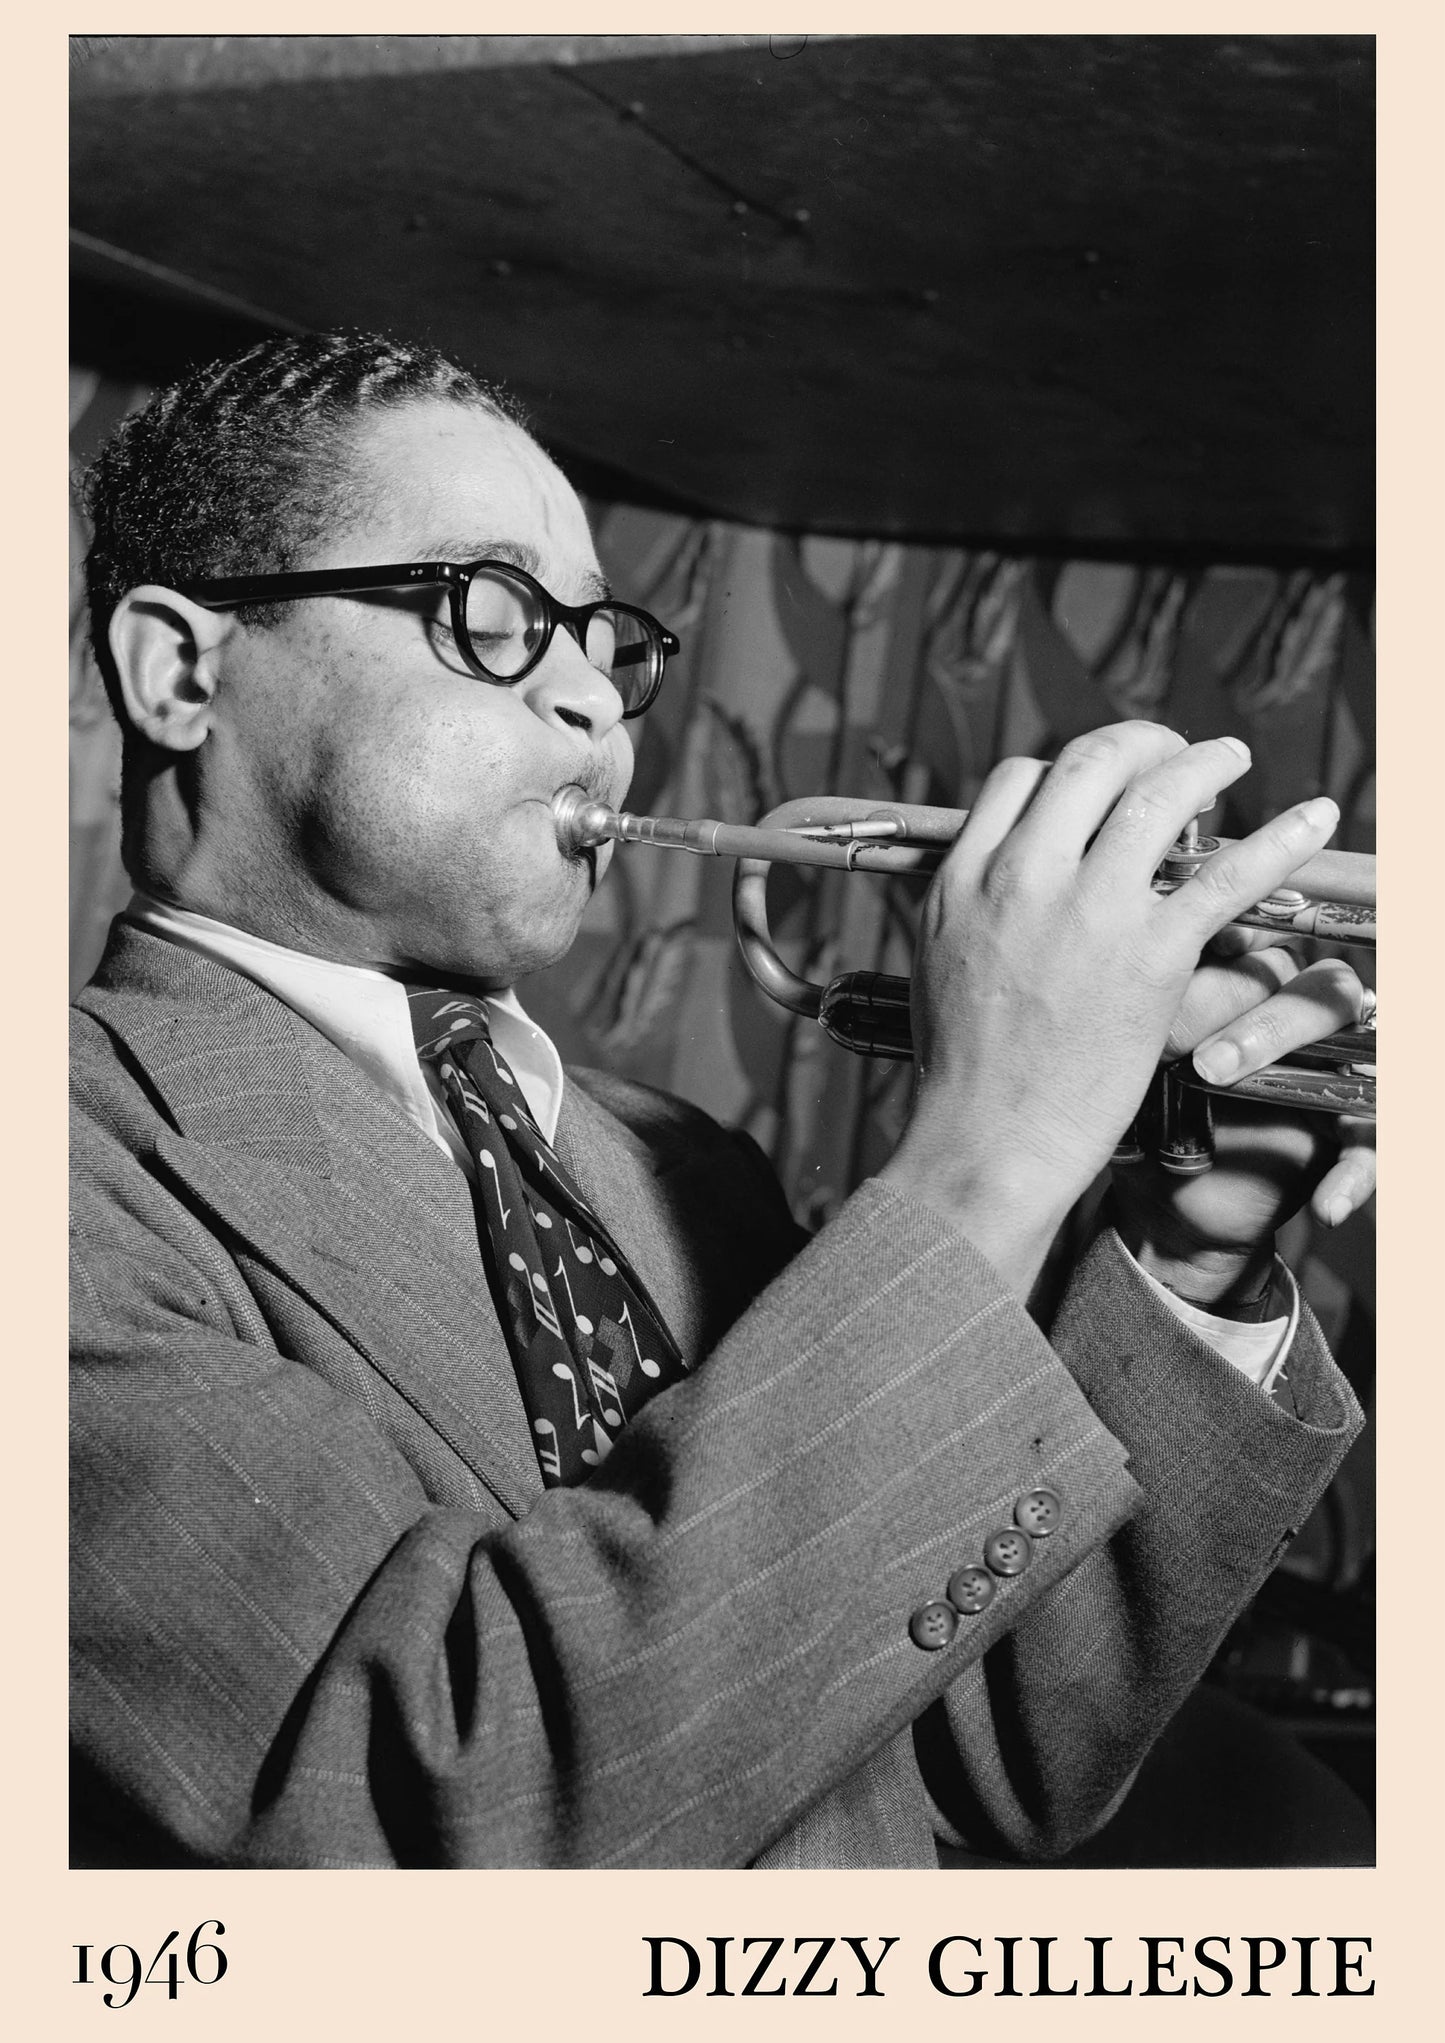 1946 photo of Dizzy Gillespie, crafted into a jazz poster